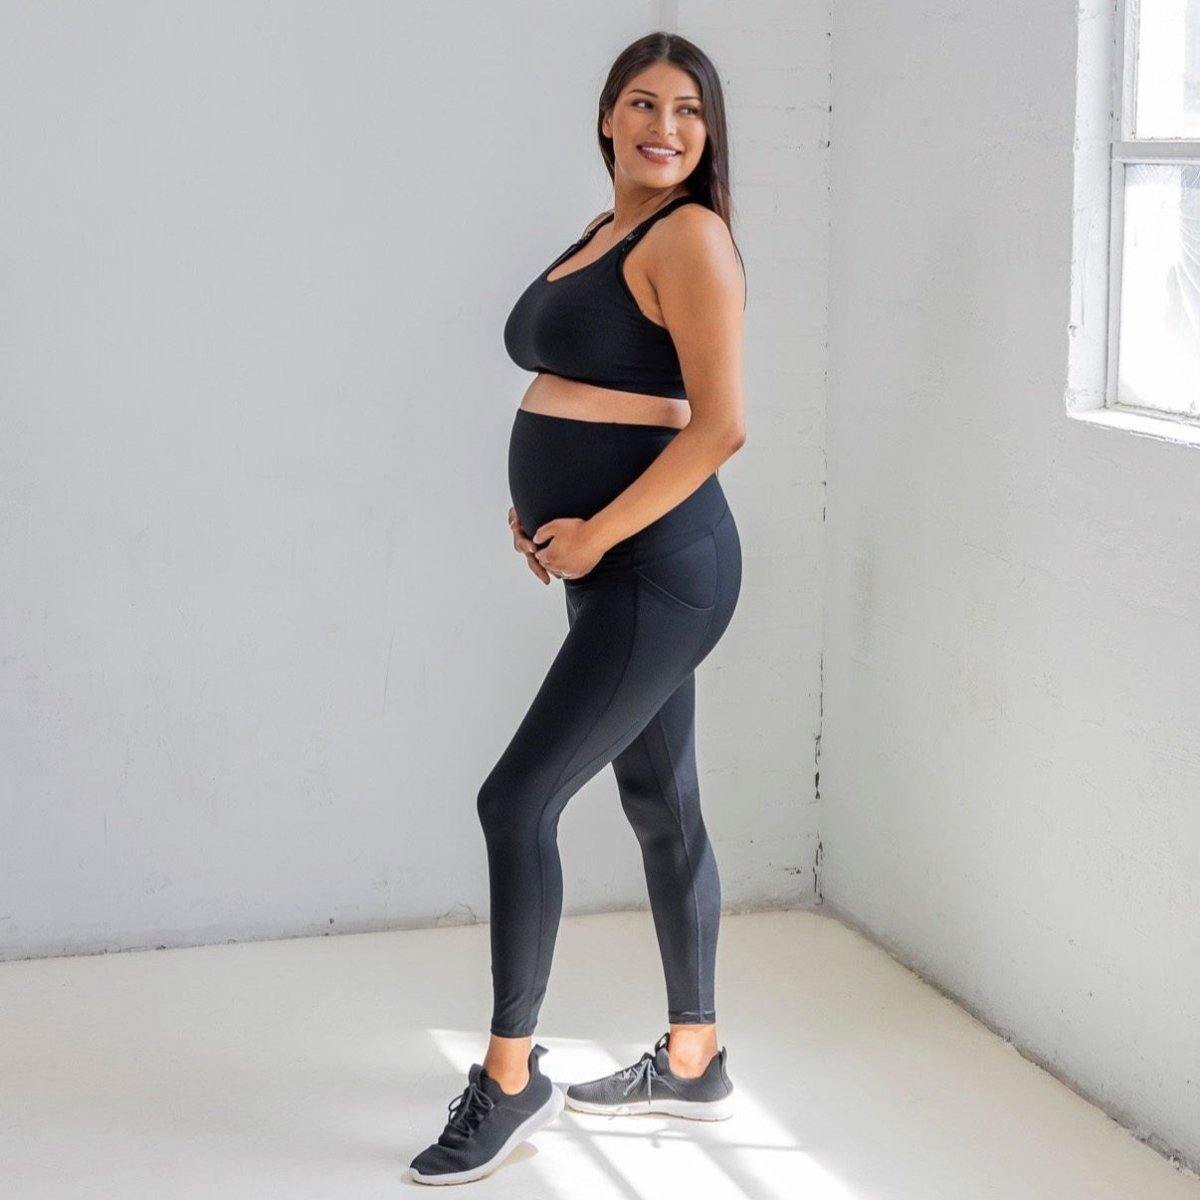 Stay active with our maternity athletic wear